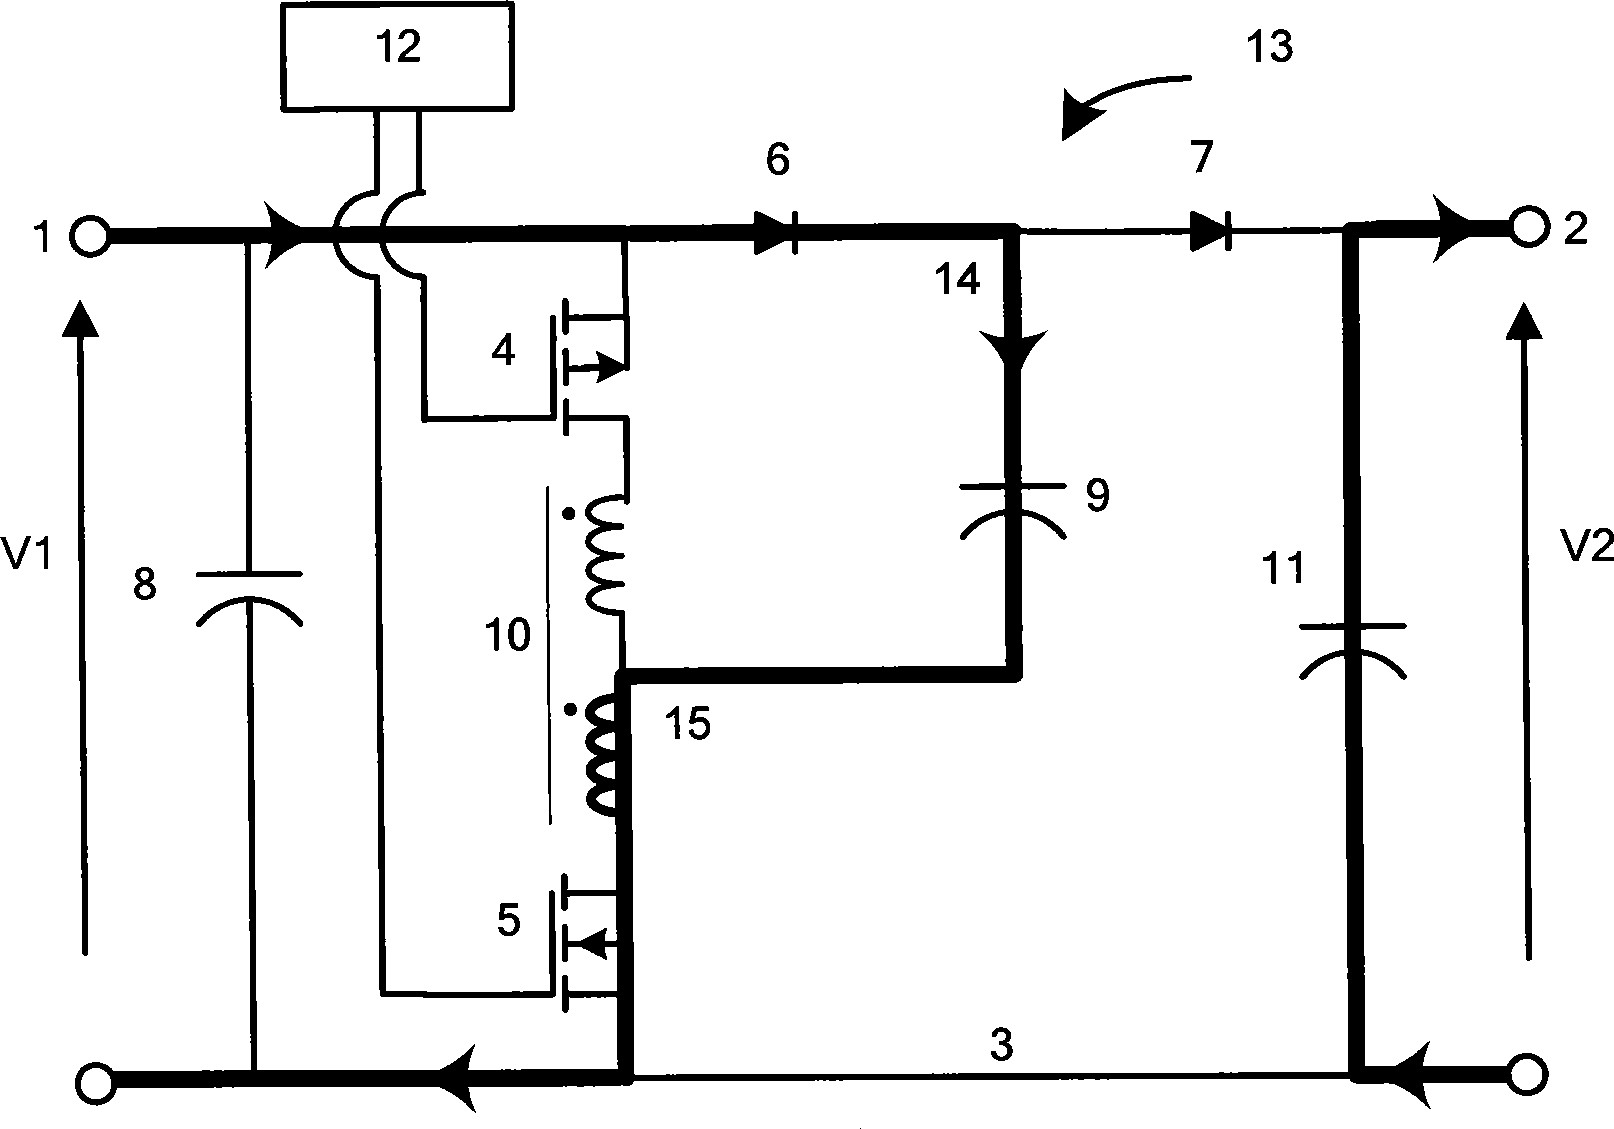 Resonant switched capacitor direct current voltage converter